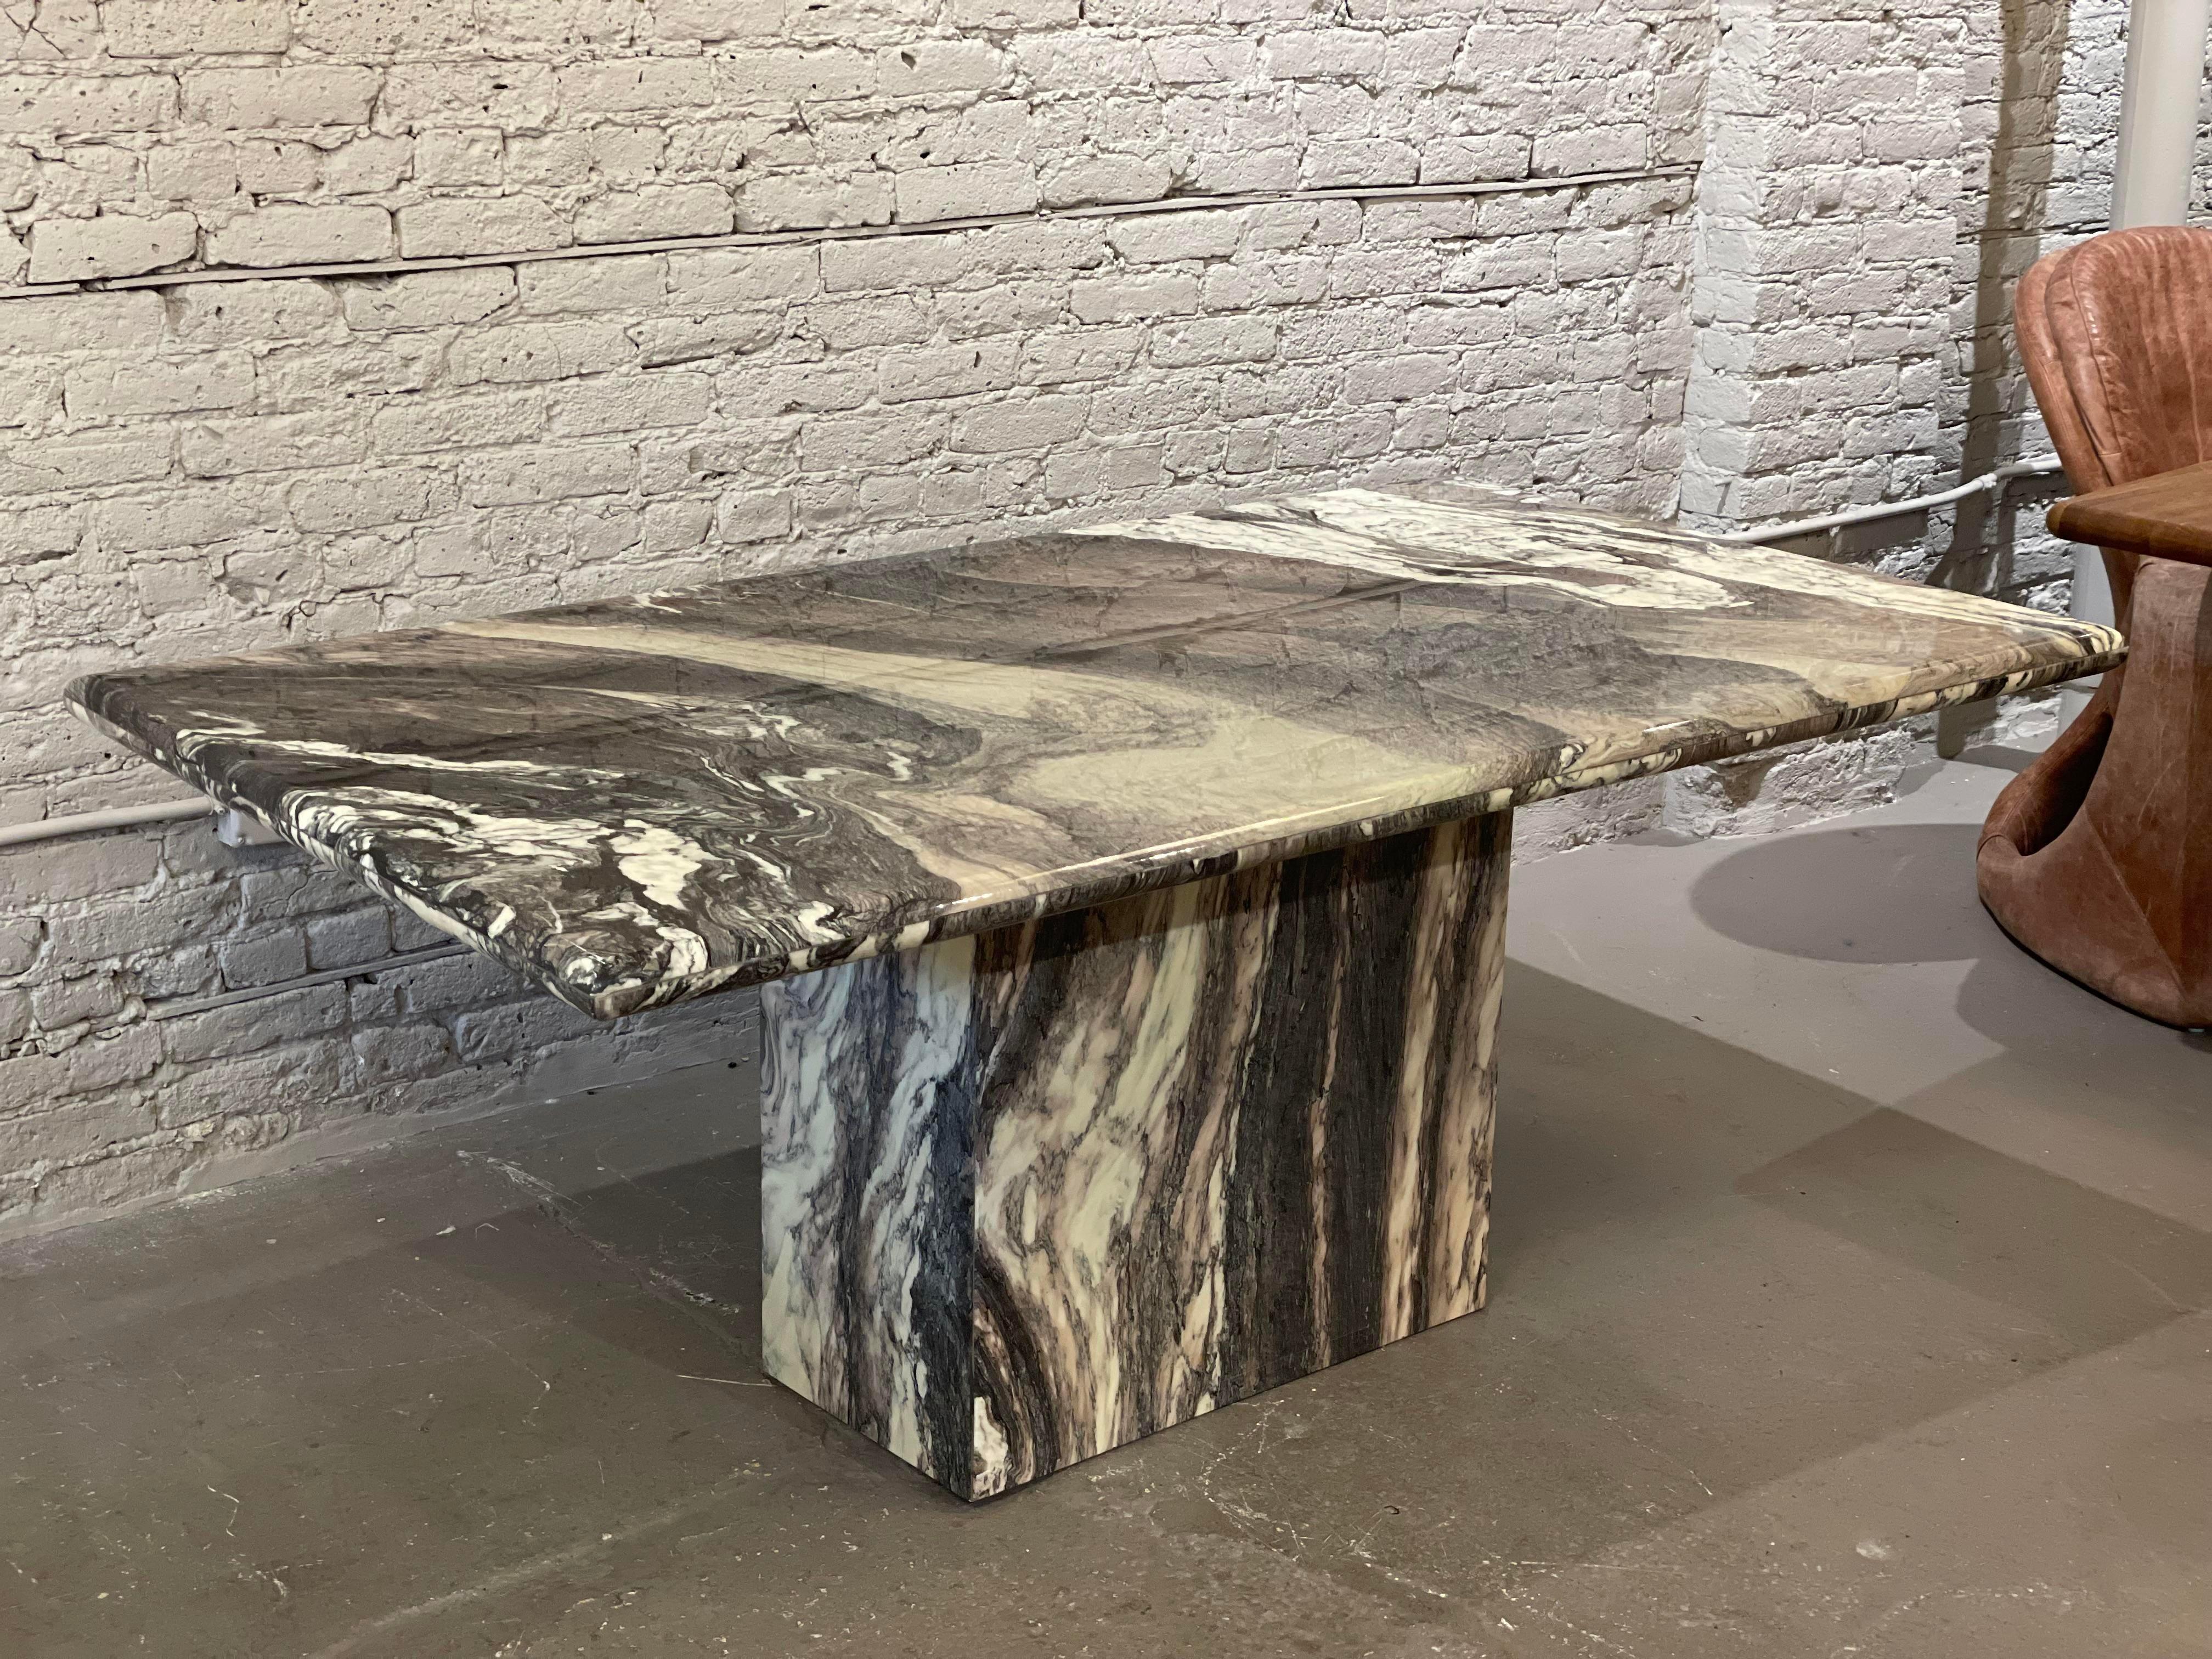 Simply stunning, dramatic, and gorgeous. Cipollini Ondulato marble was used by the ancient Greeks and Romans. Quarried in the Greek islands and exported to Rome, this stone became immensely popular in the imperial period.

This table has a